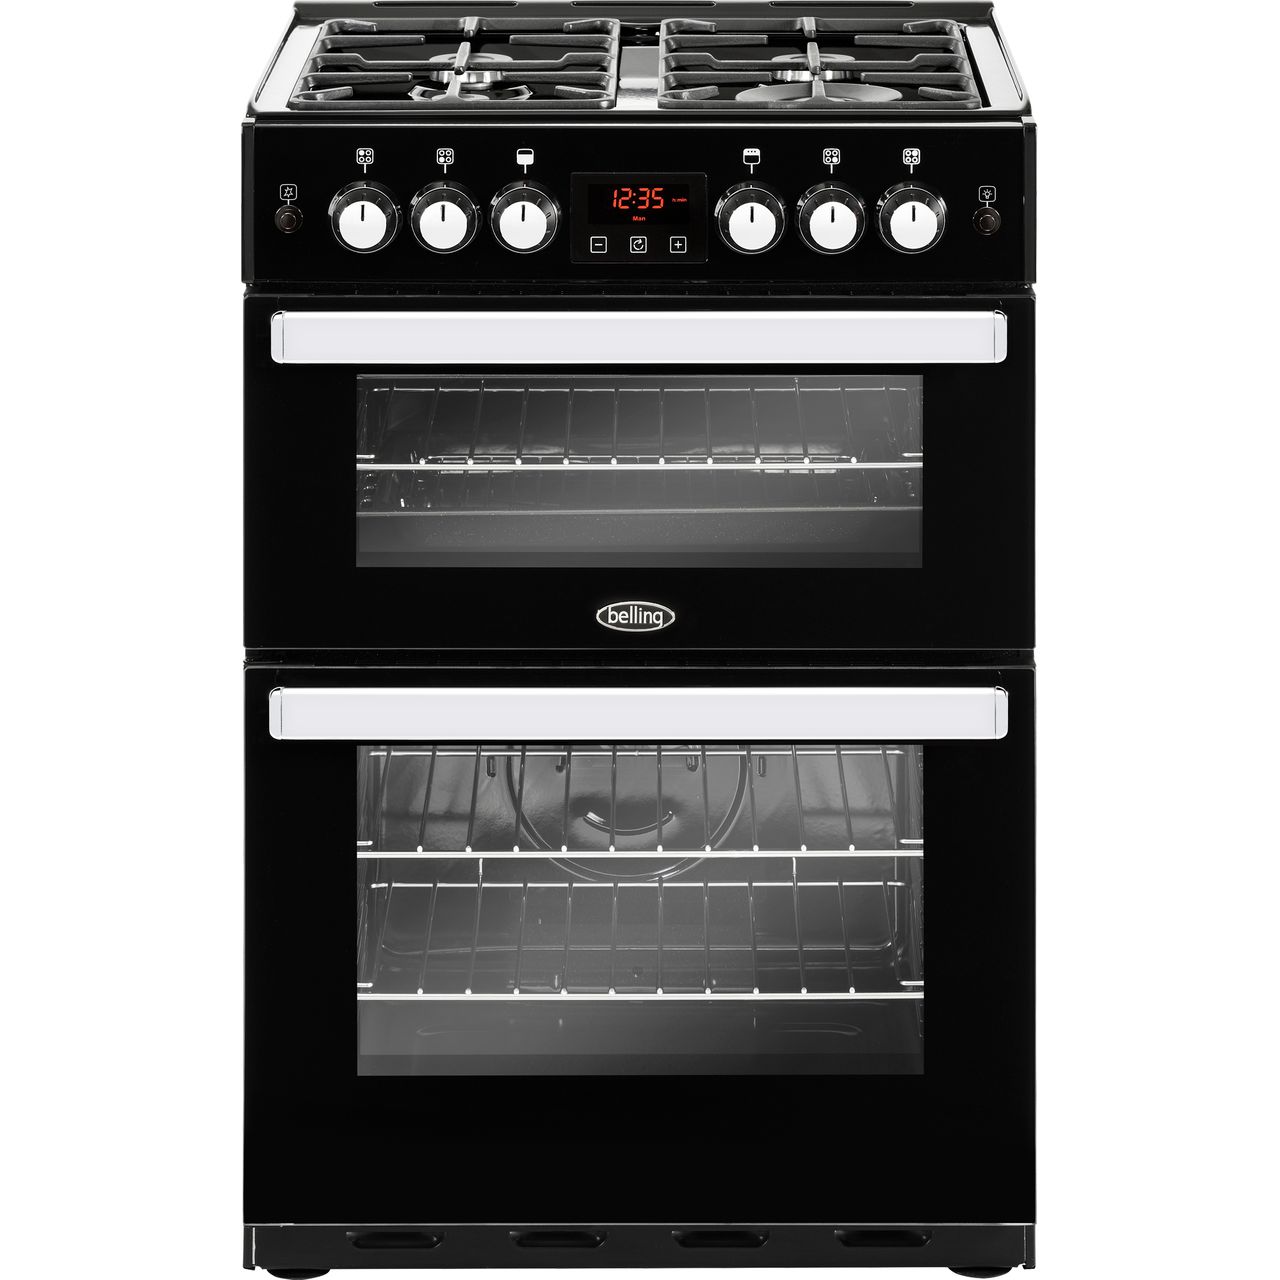 Belling Cookcentre 60G Gas Cooker with Full Width Electric Grill Review